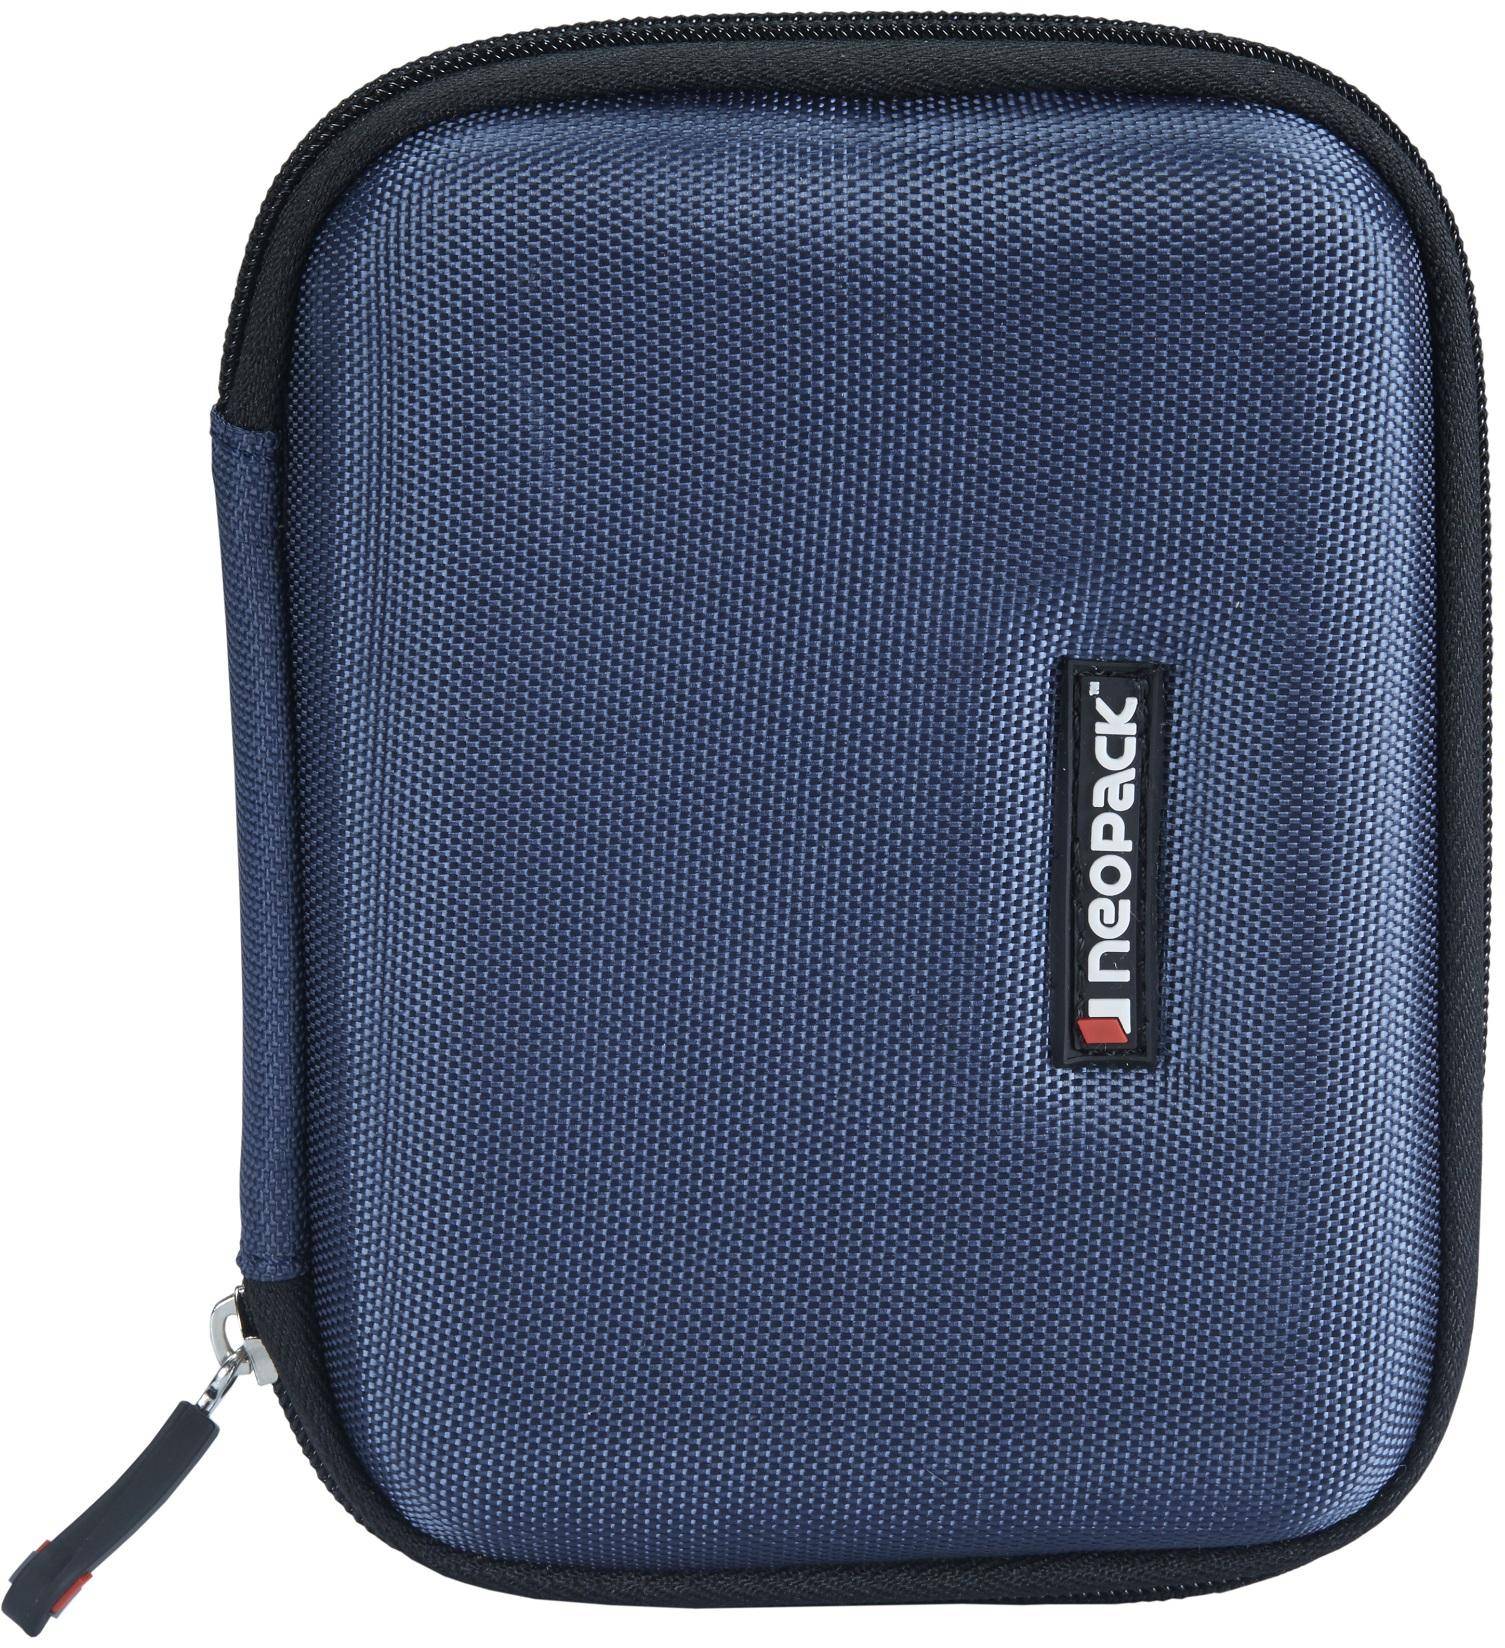 Neopack Ultra Slim HDD Case 2.5 inch Portable Hard Disk zoom image